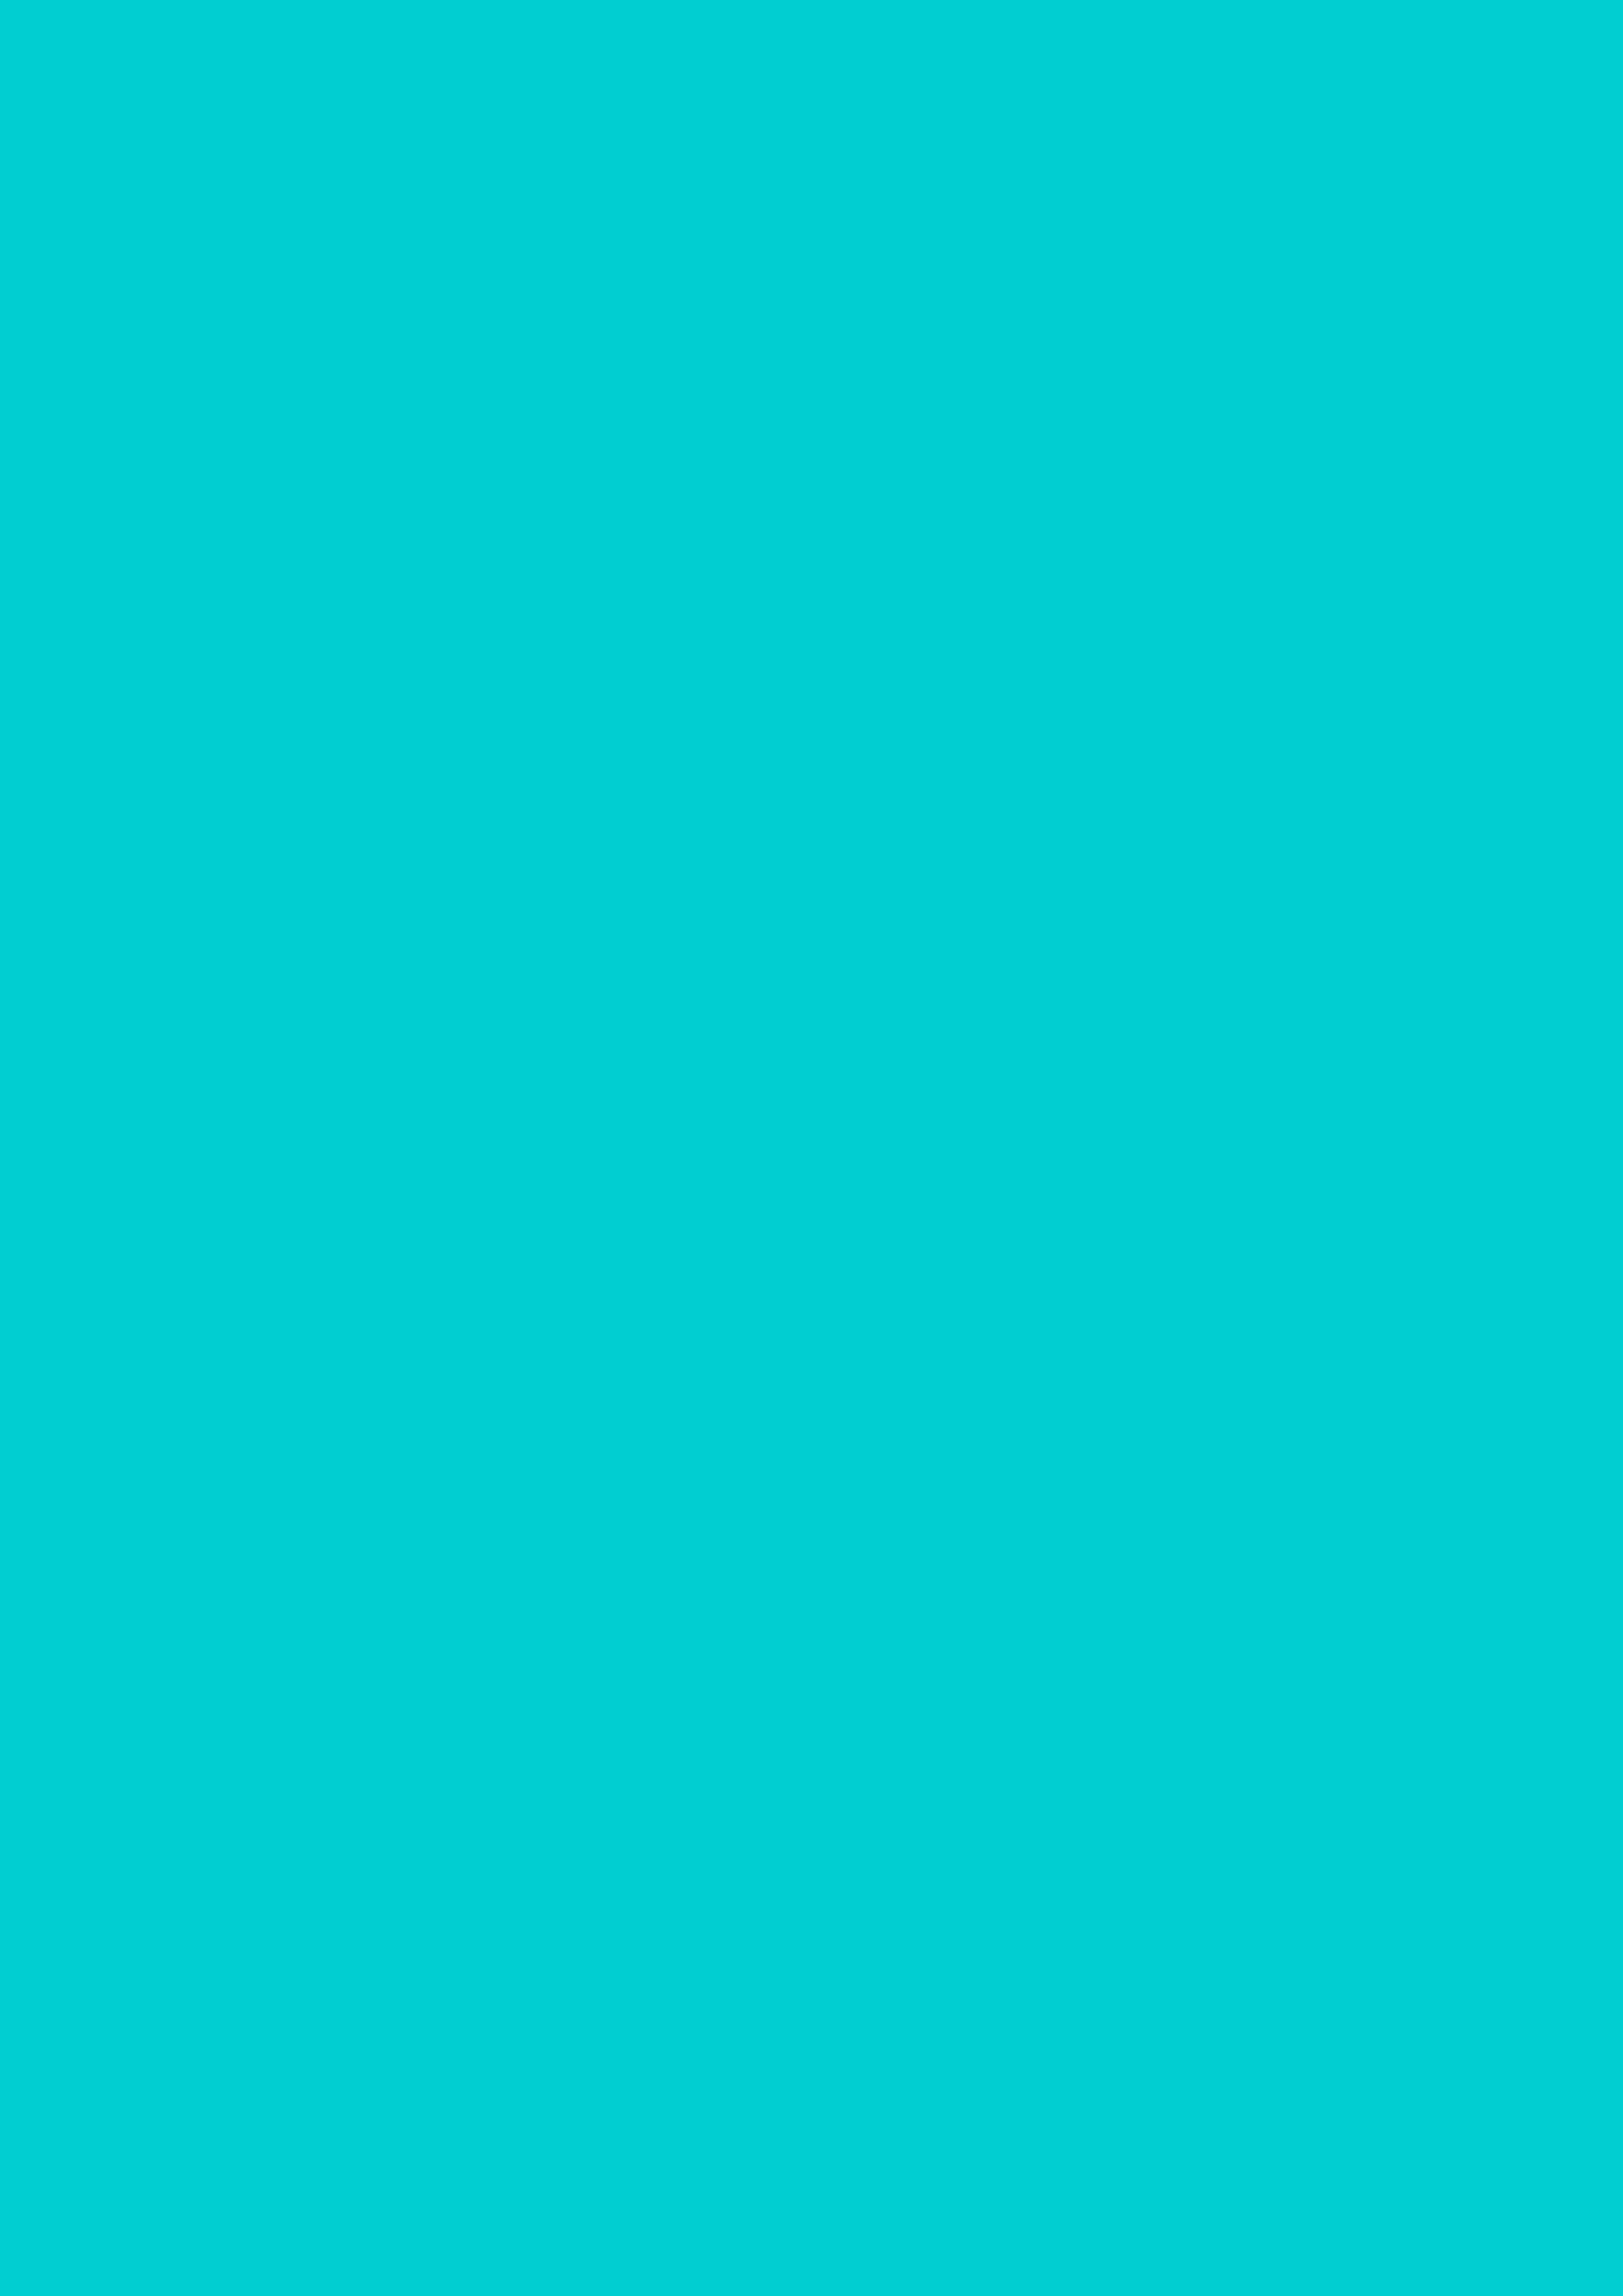 2480x3508 Dark Turquoise Solid Color Background